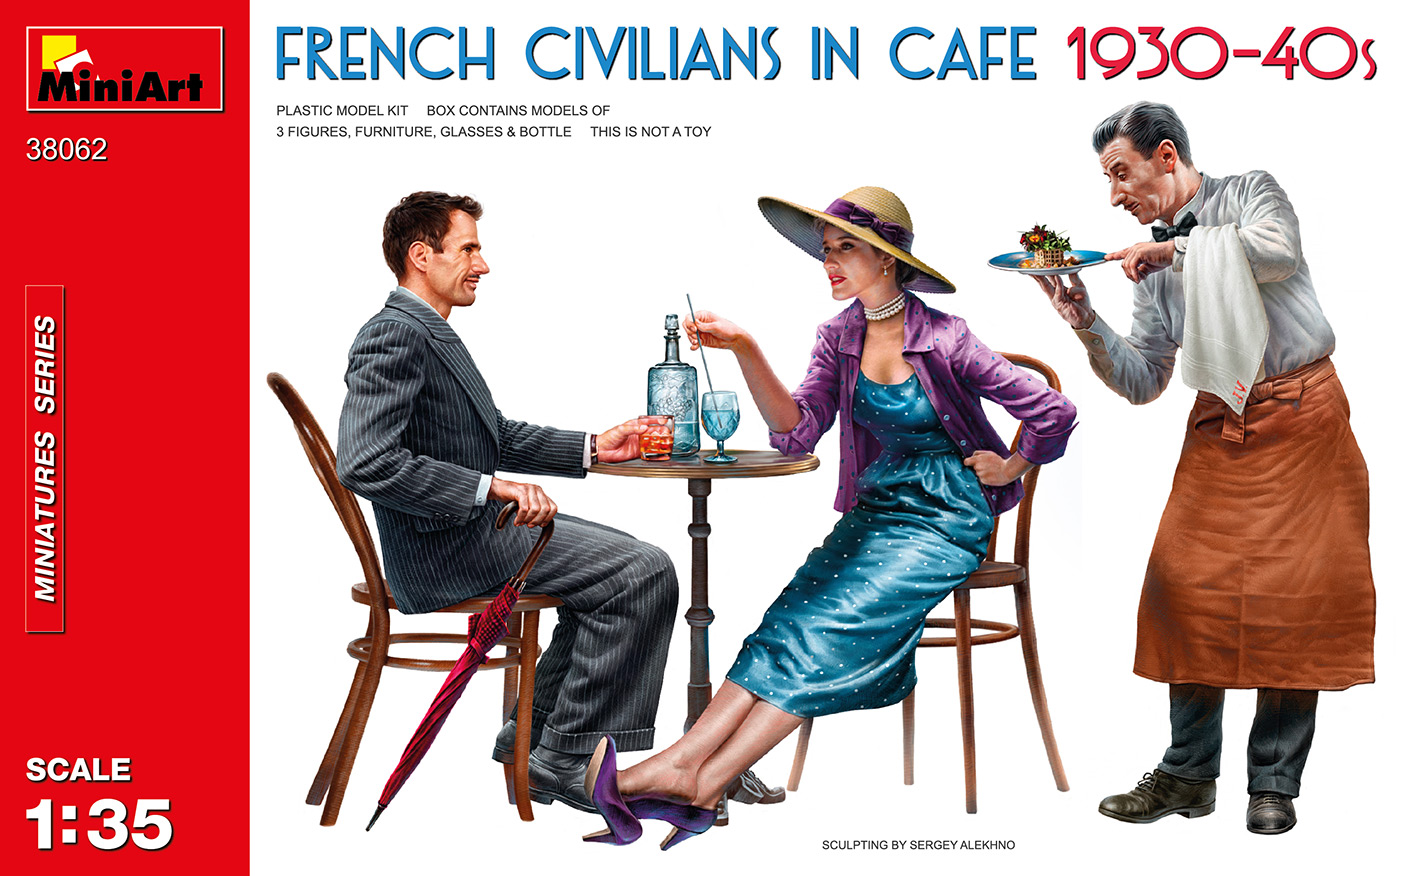 French Civilians in Cafe 1930-40s au 1/35